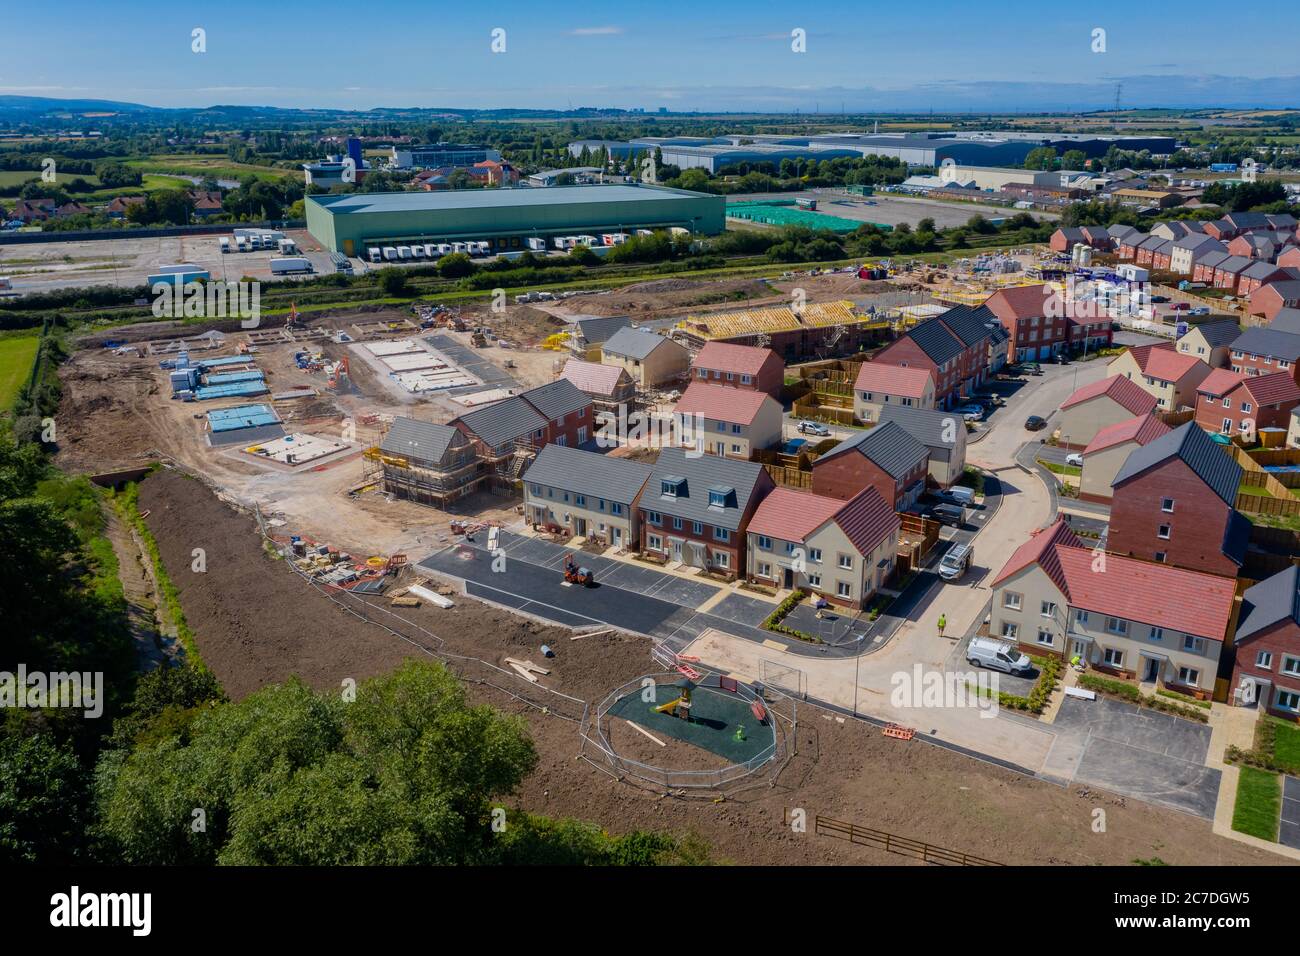 Aerial view of new houses being built / constructed by Taylet wimpy in Bridgwater, Somerset UK. Stock Photo